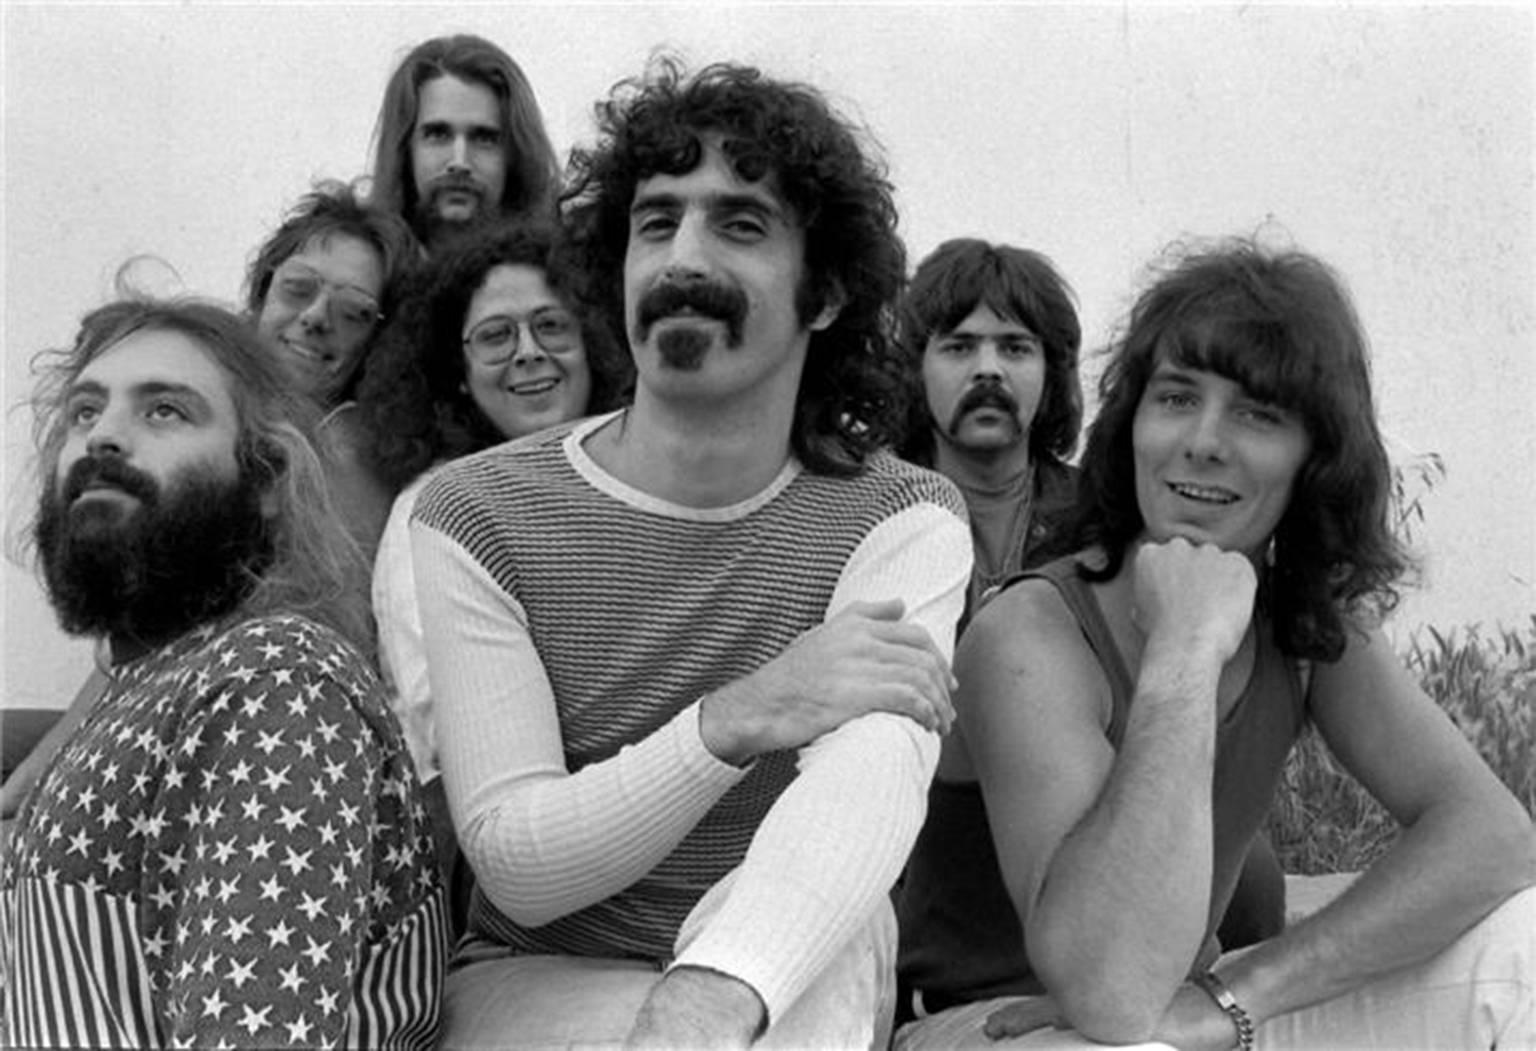 Henry Diltz Black and White Photograph – Frank Zappa & The Mothers of Invention